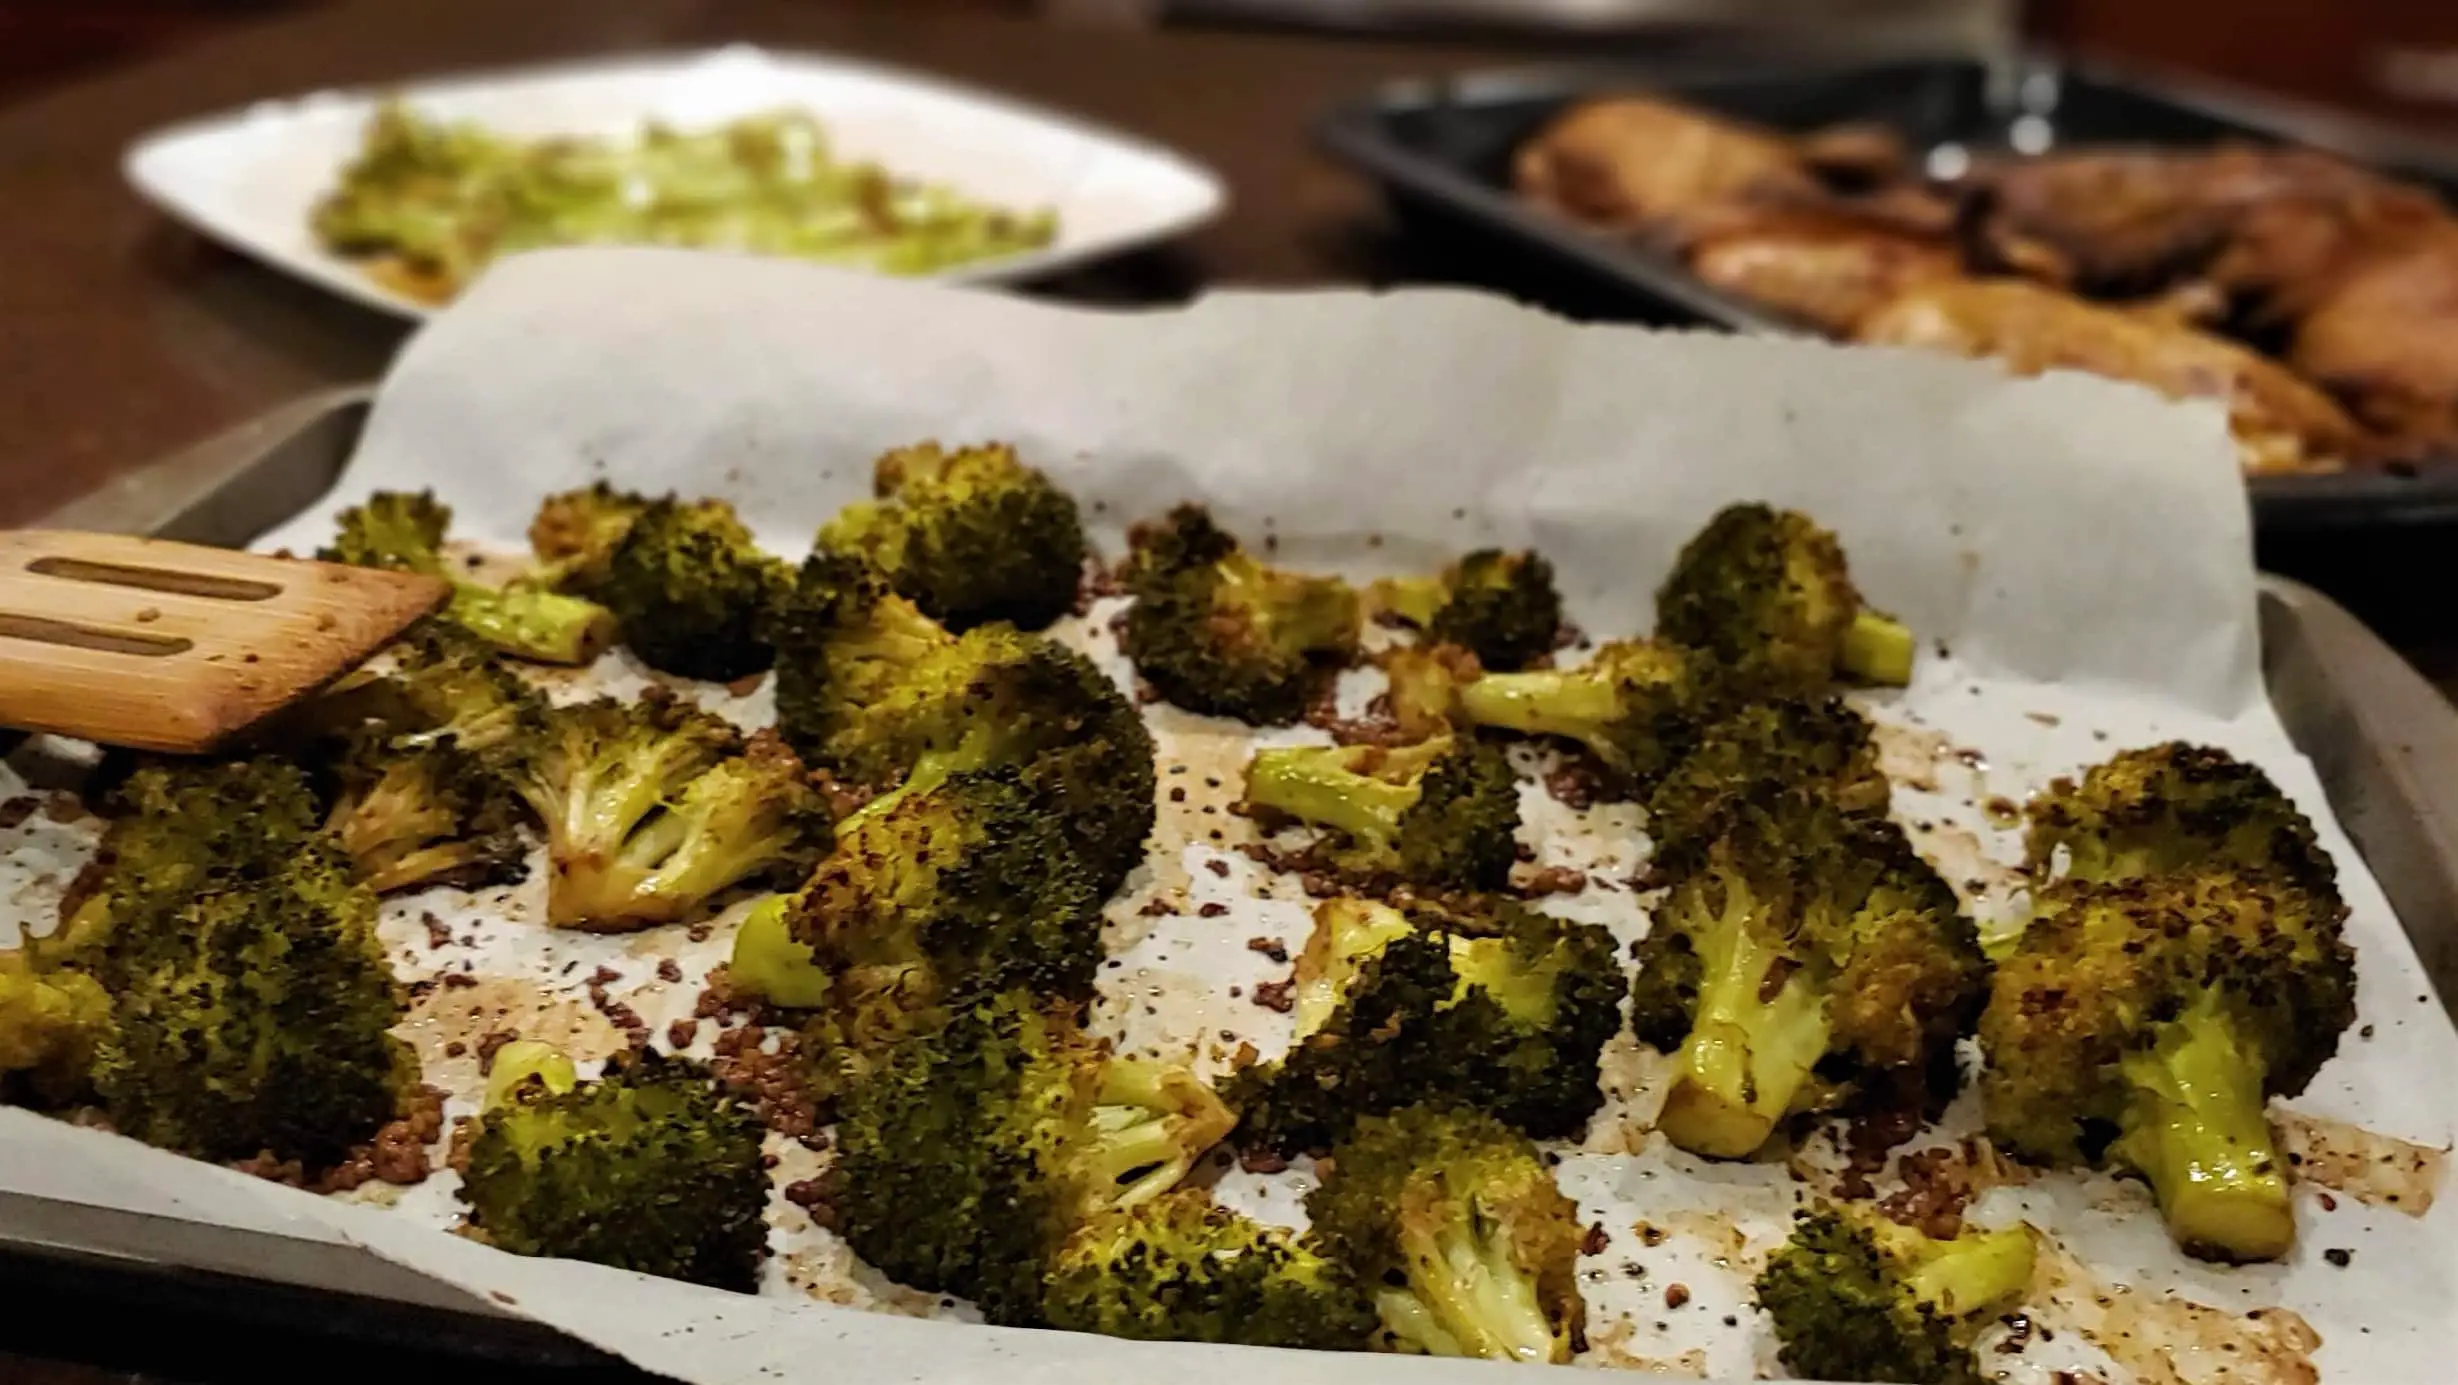 Roasted Broccoli - Dining in with Danielle